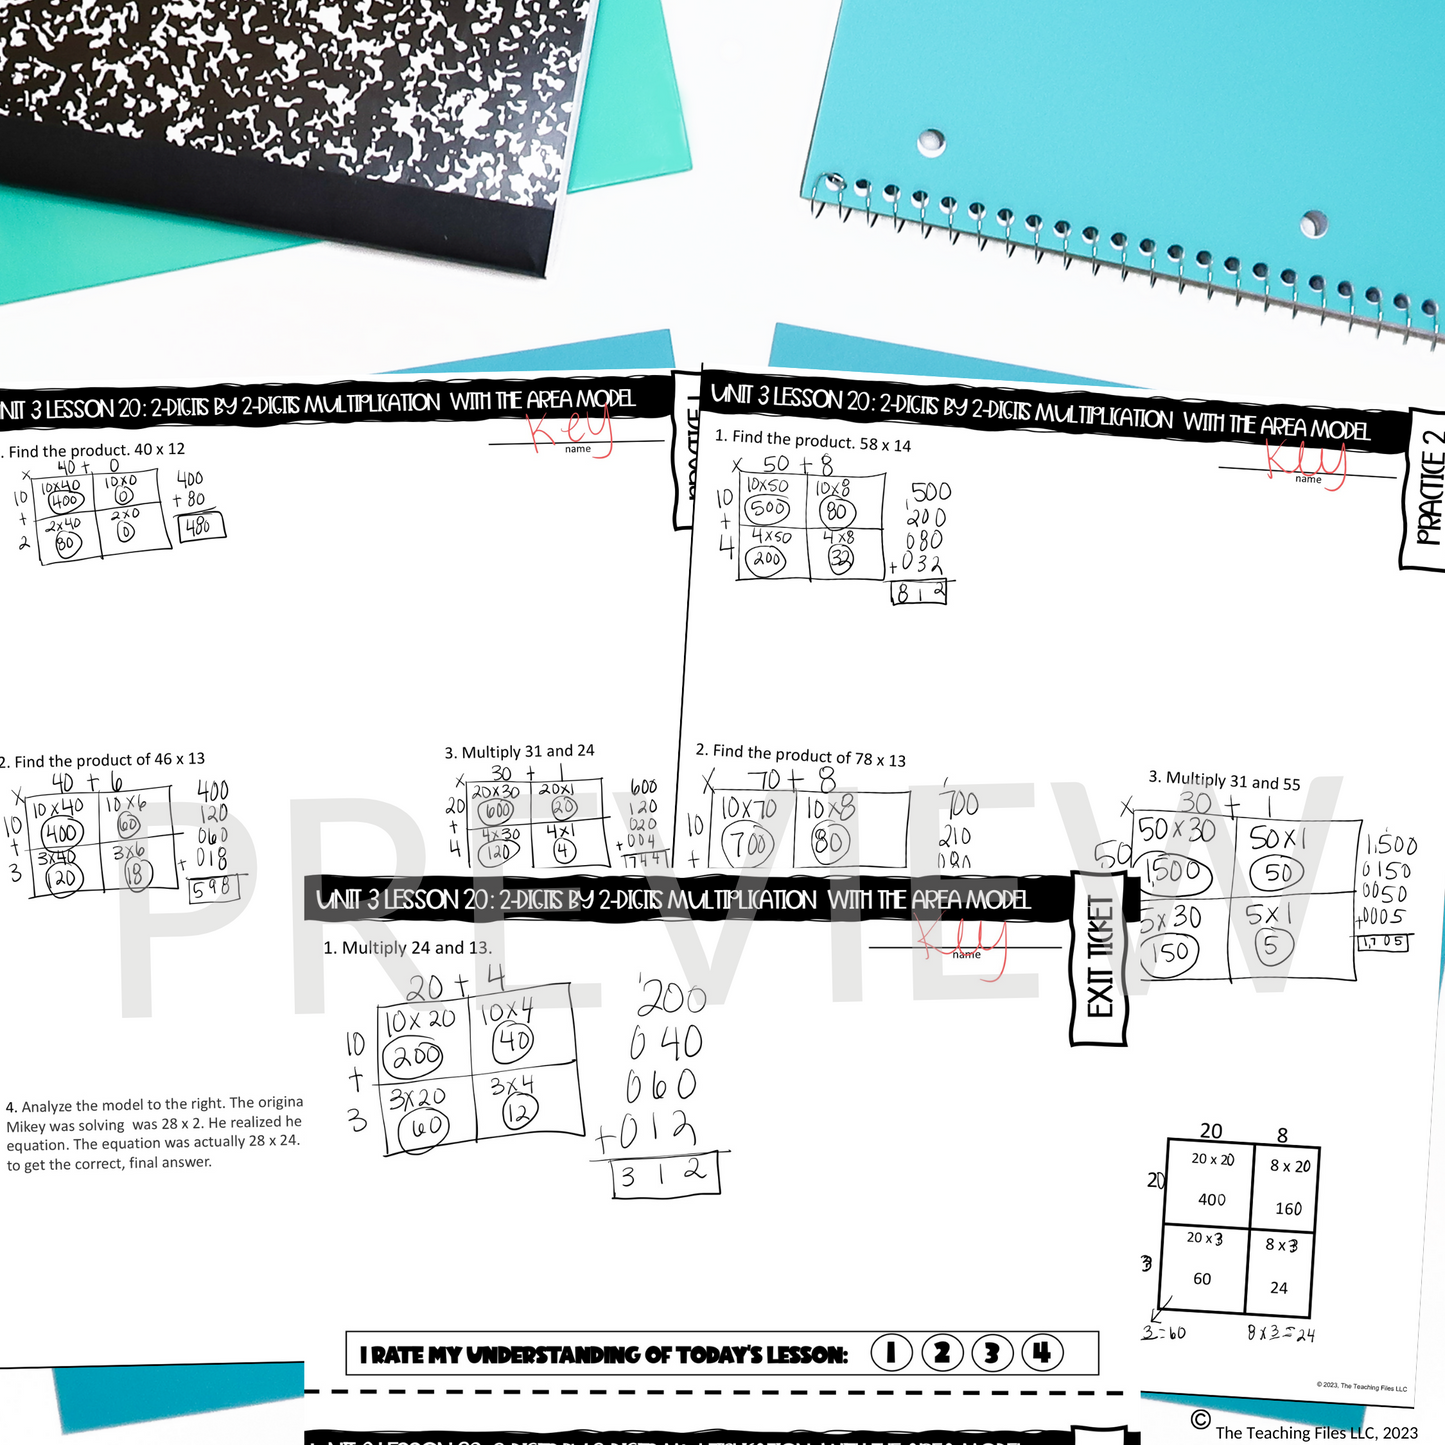 2-Digit by 2-Digit Multiplication | 4th Grade Math Guided Notes Lesson | CCSS-Aligned